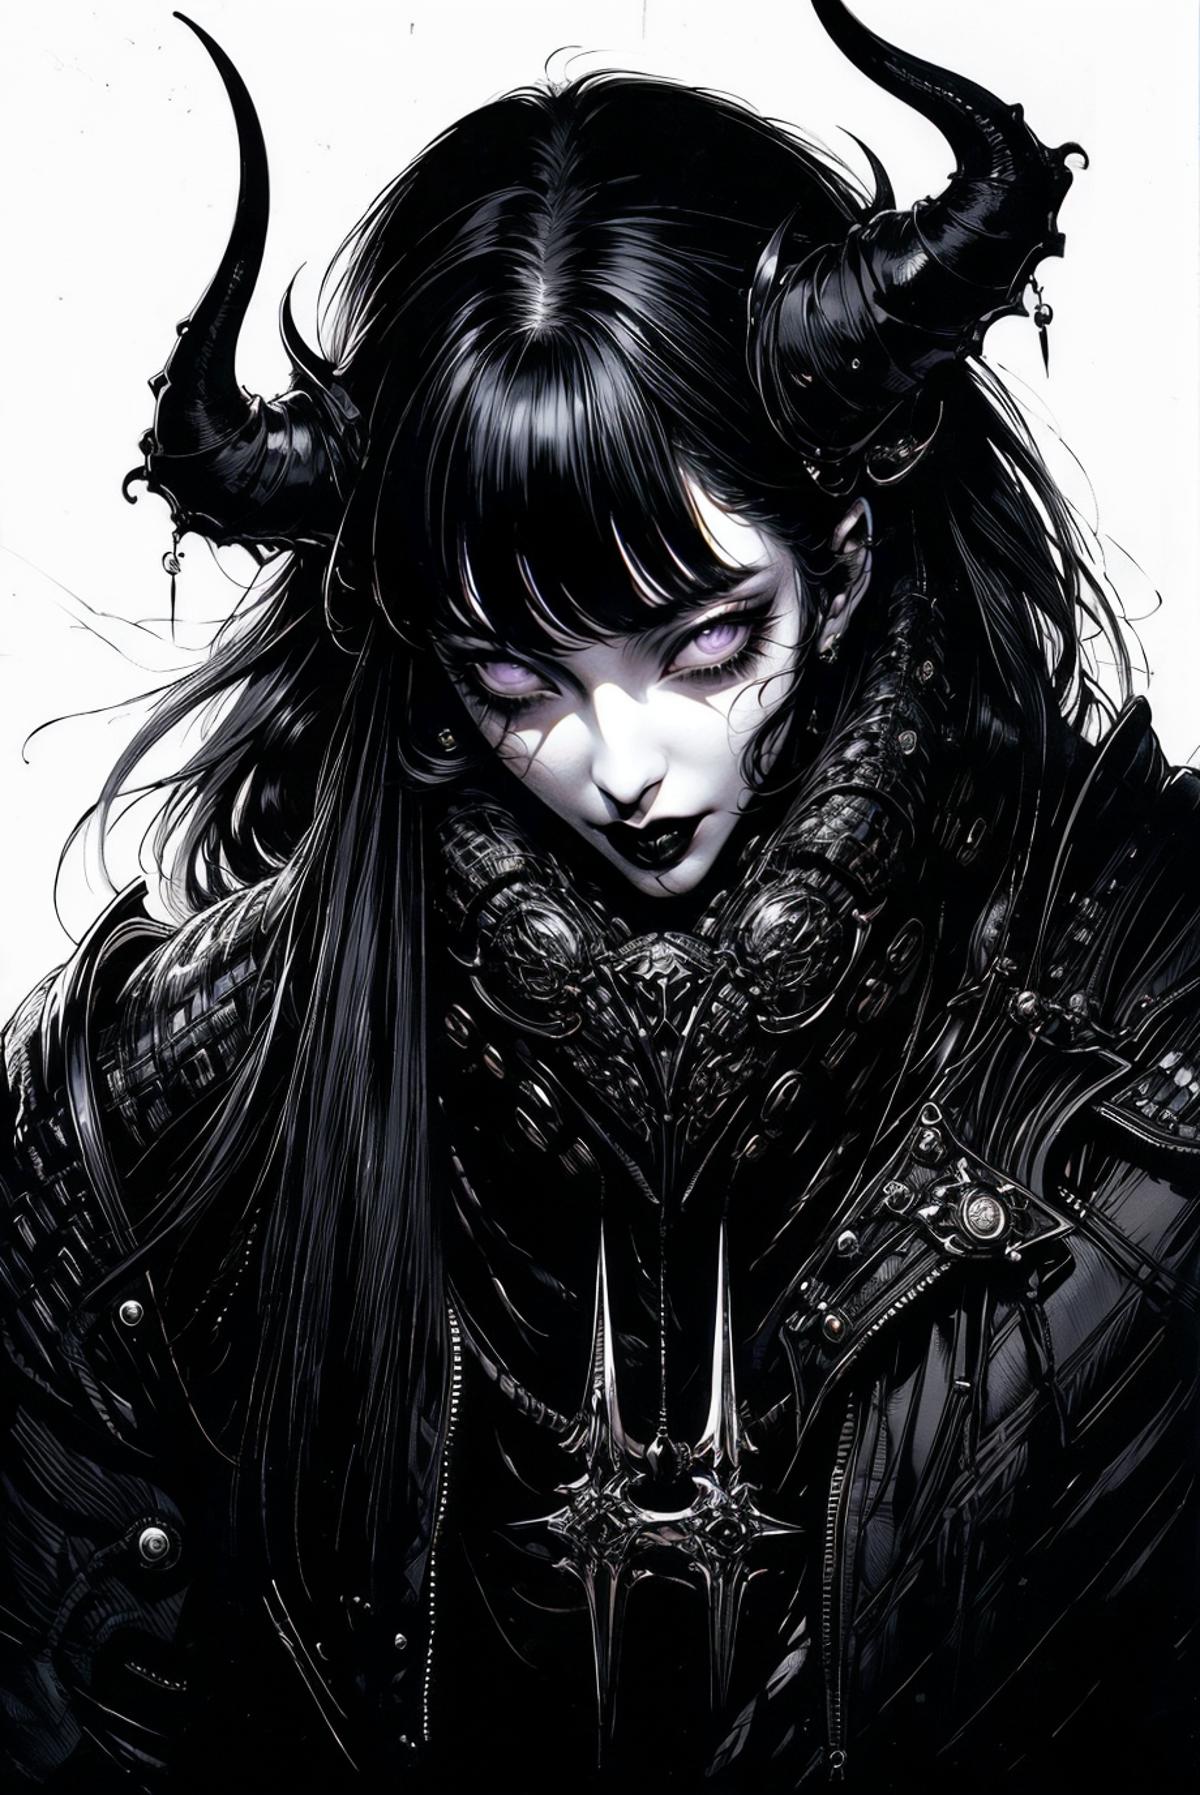 Darkly Drawn Illustration of a Woman with Long Hair and Horns